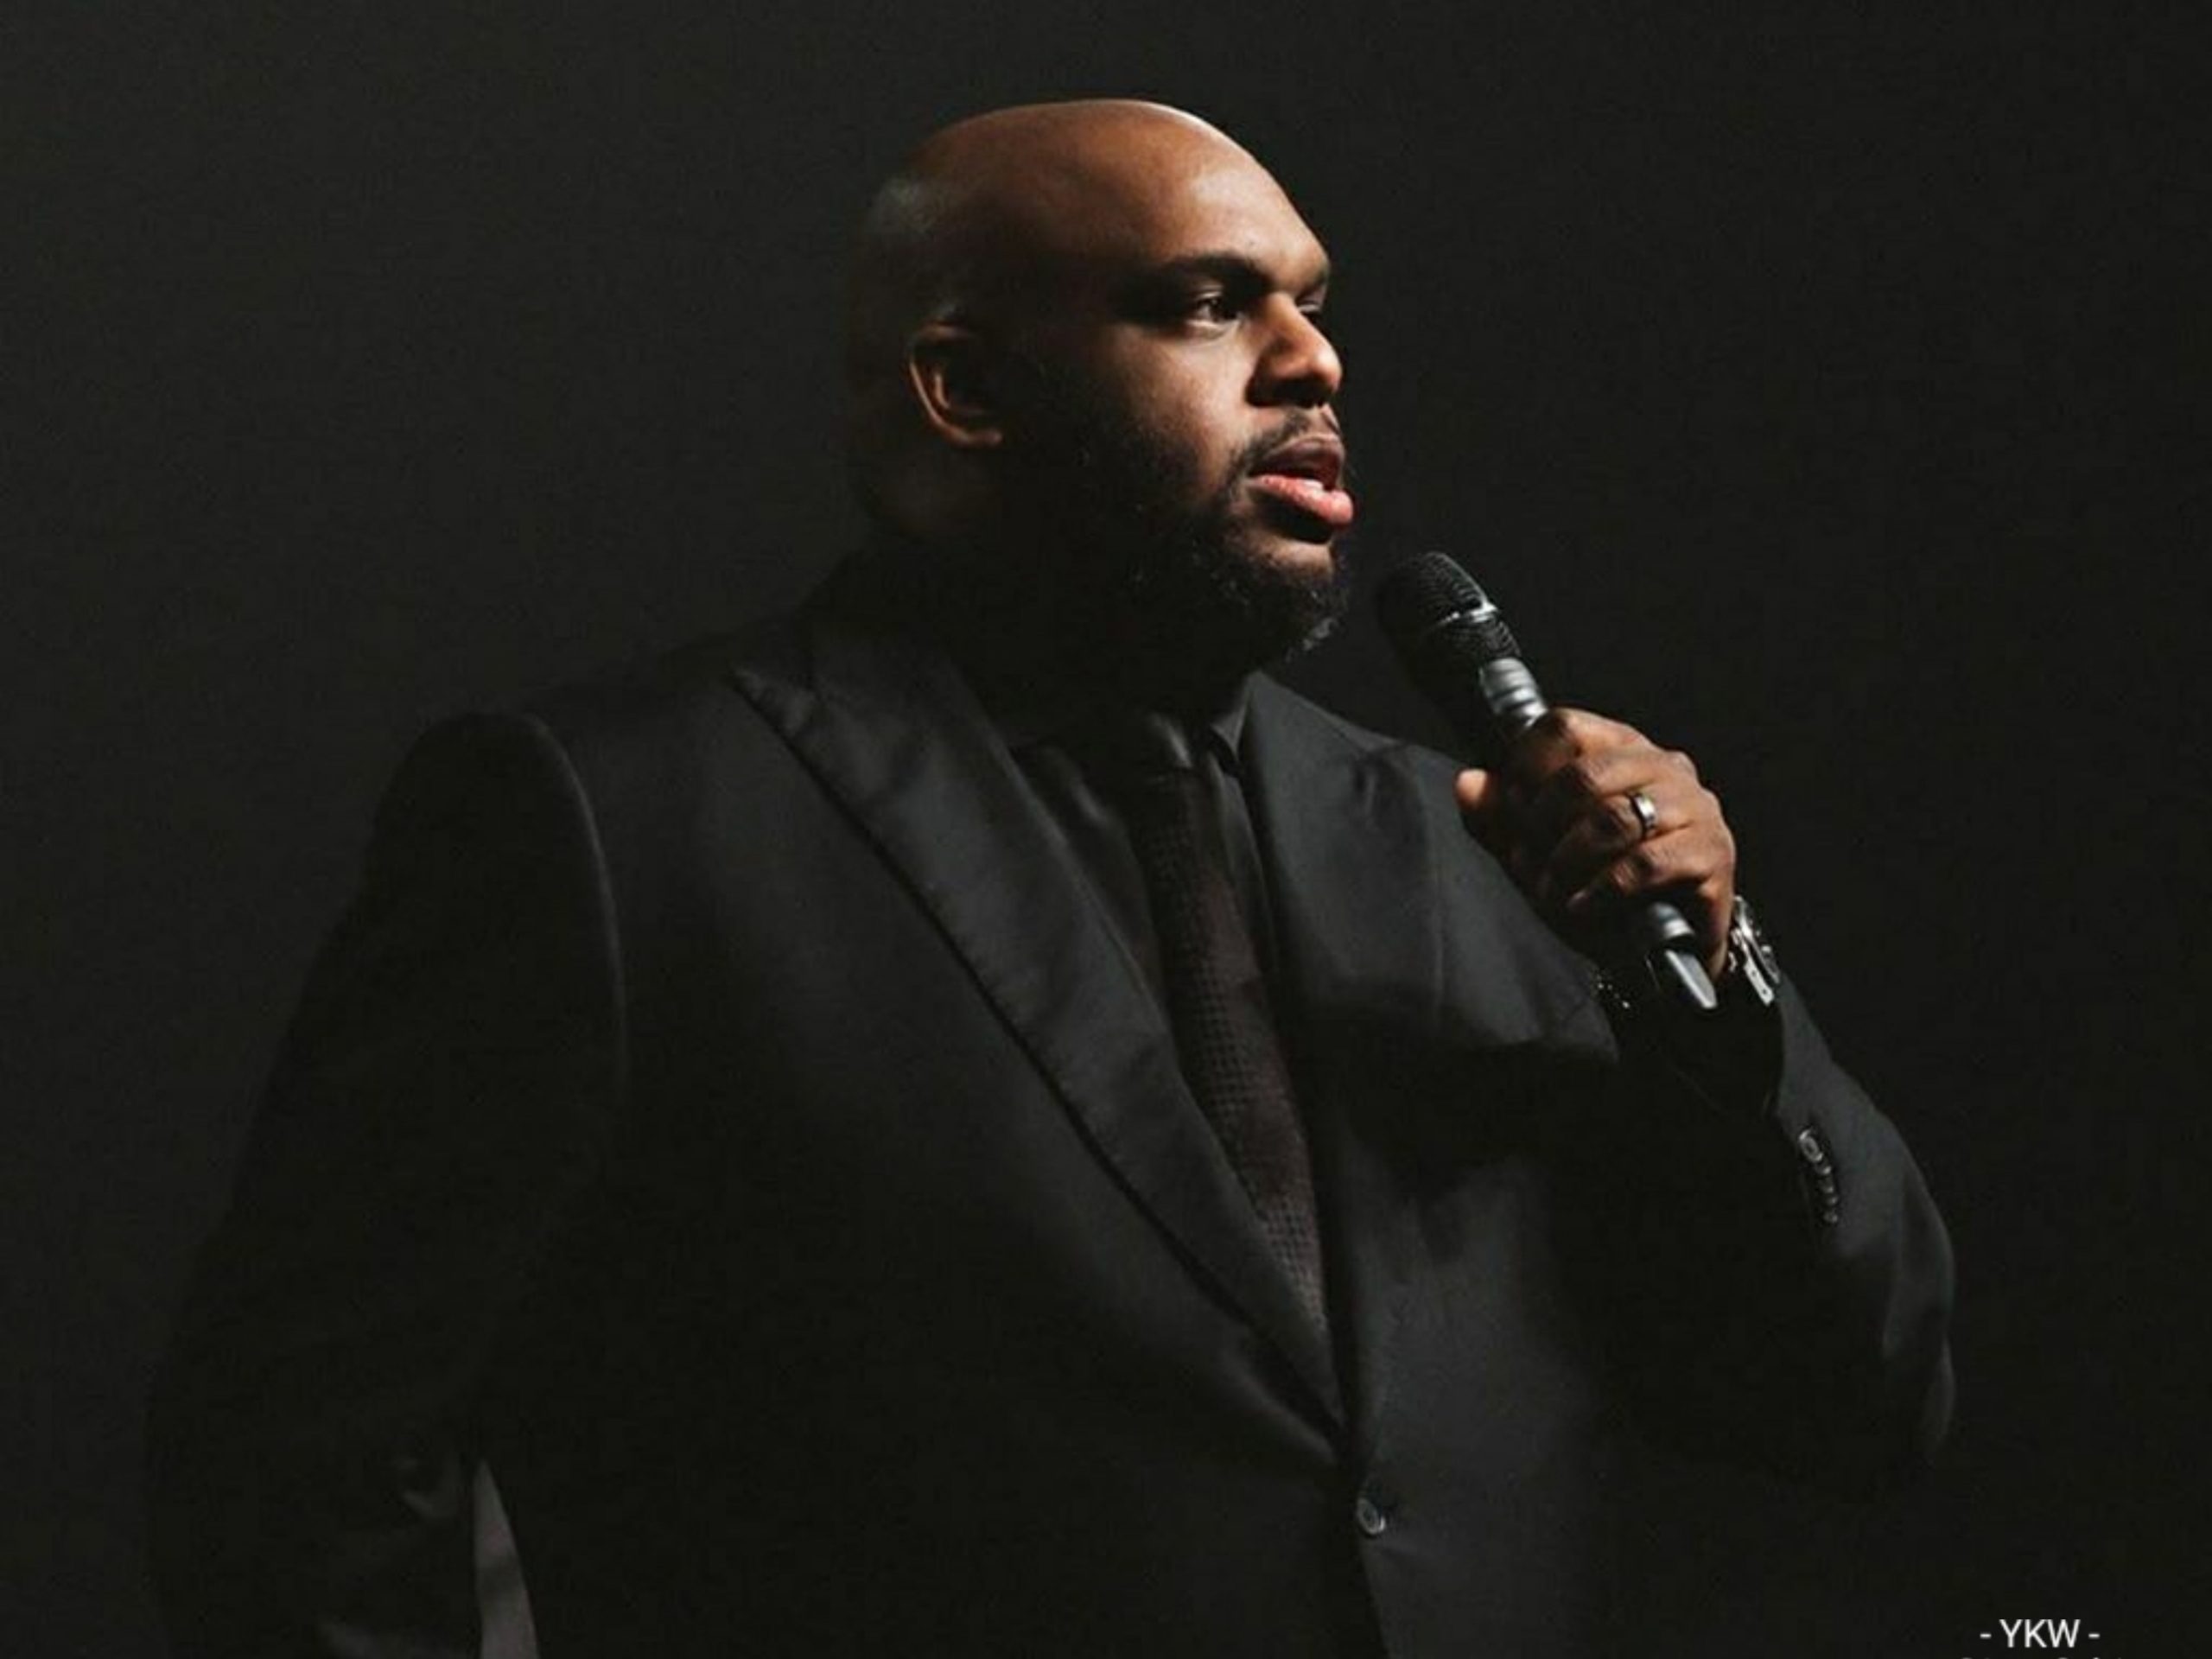 Pastor John Gray Addresses Infidelity Accusations And Apologizes In “Face It” Video